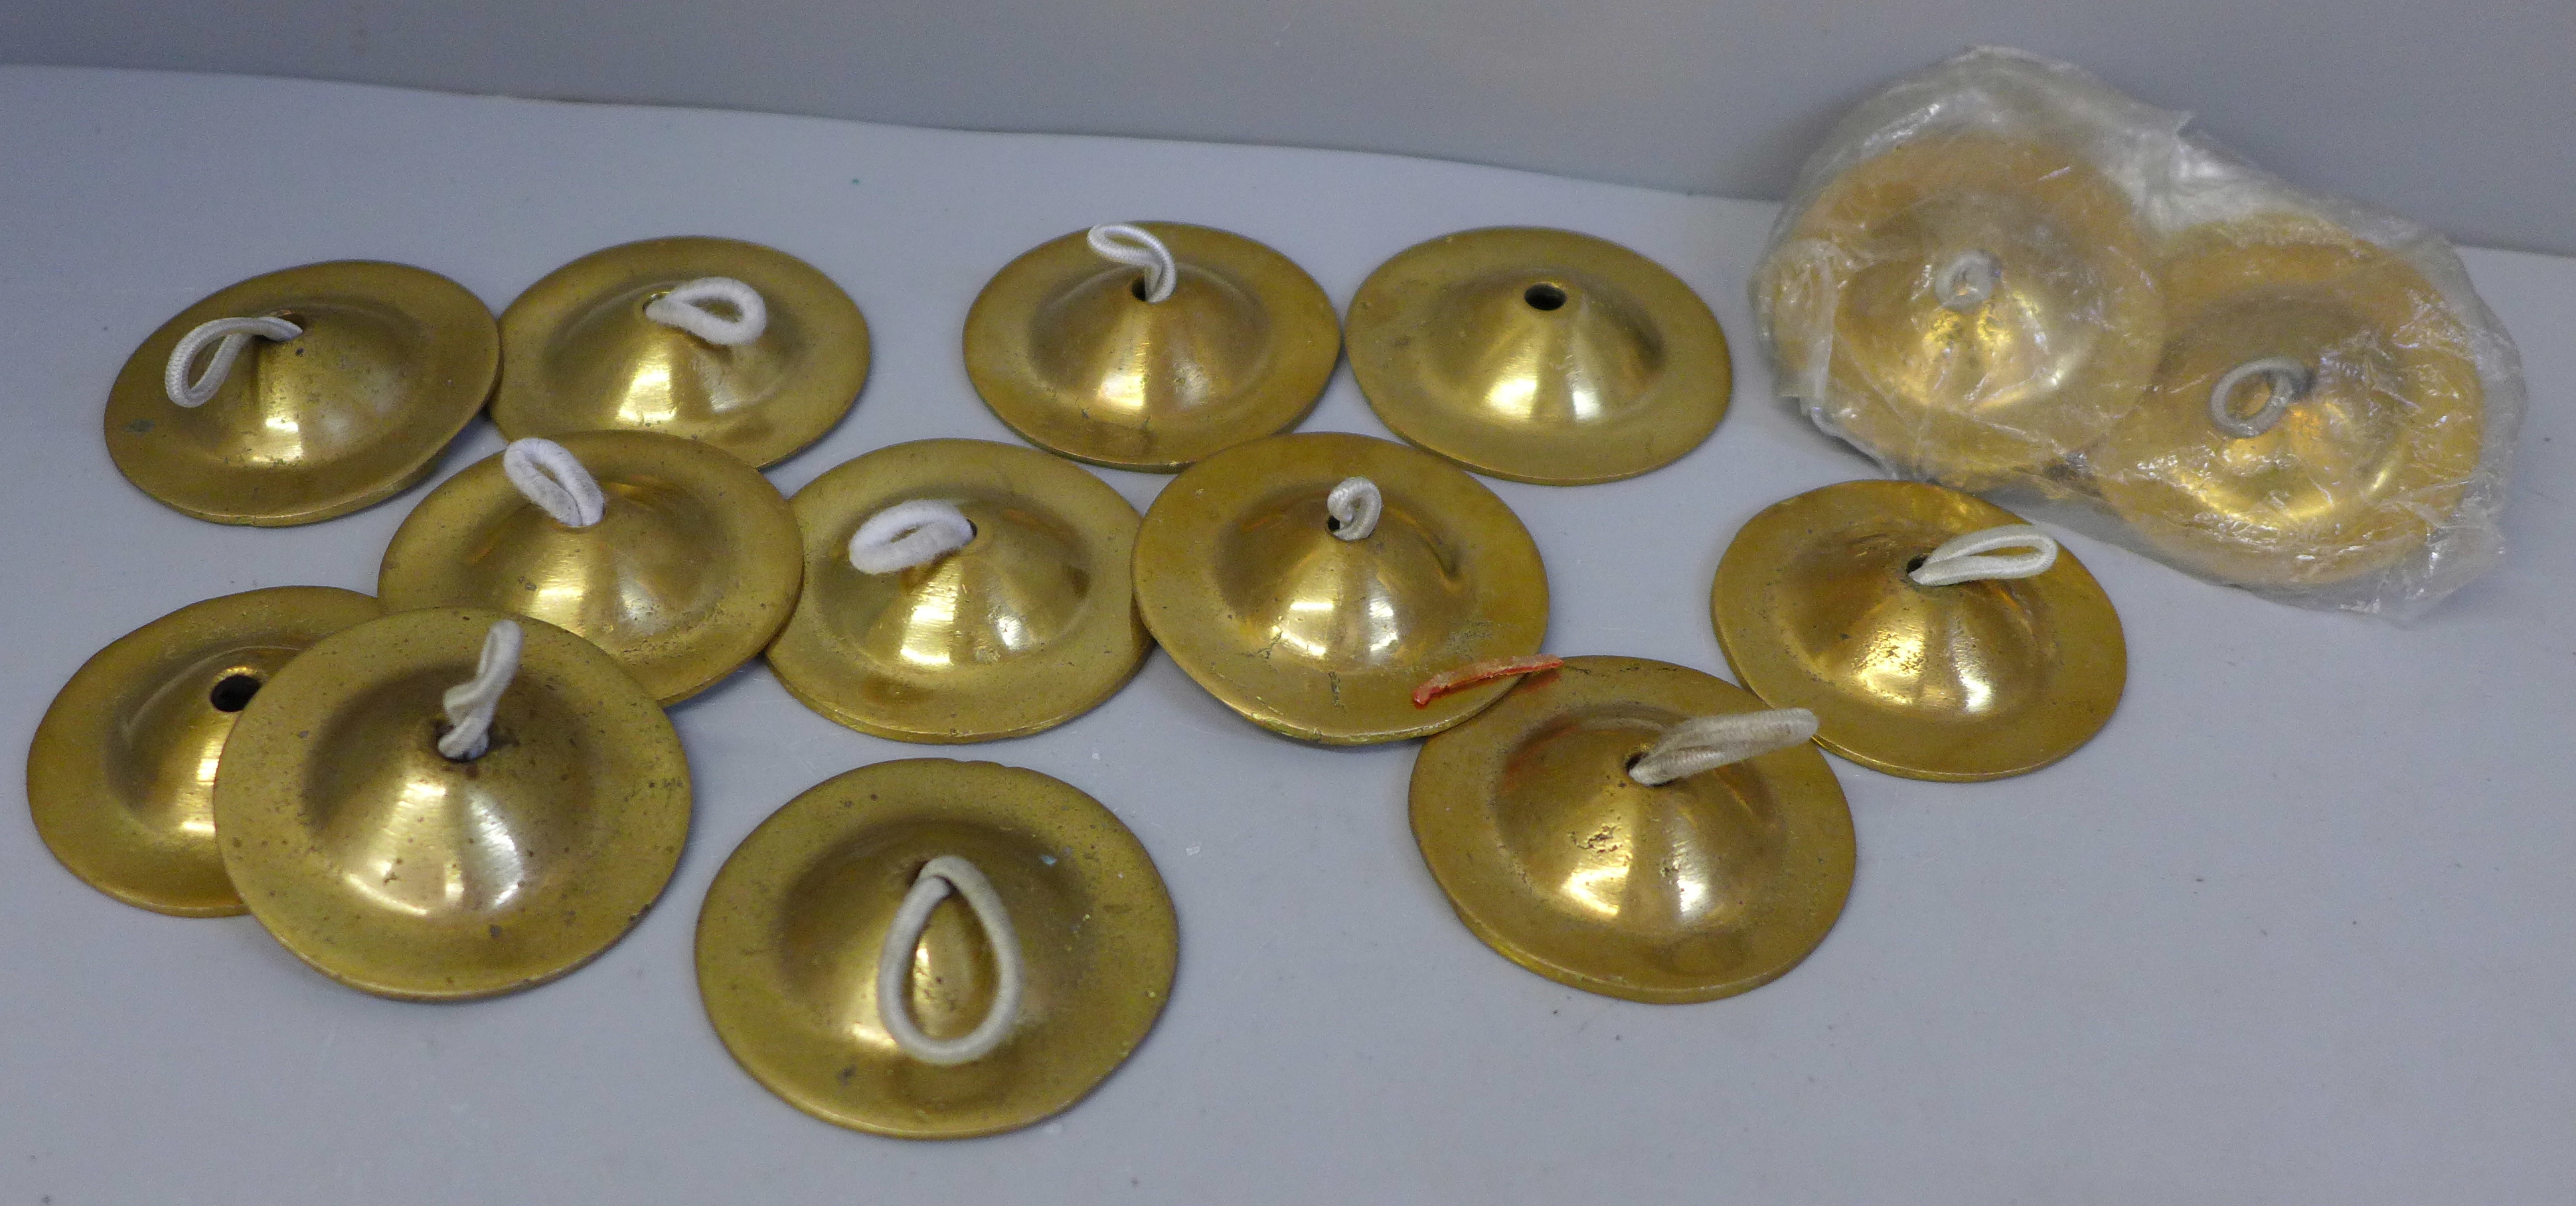 Eight pairs of brass finger cymbals for belly dancing